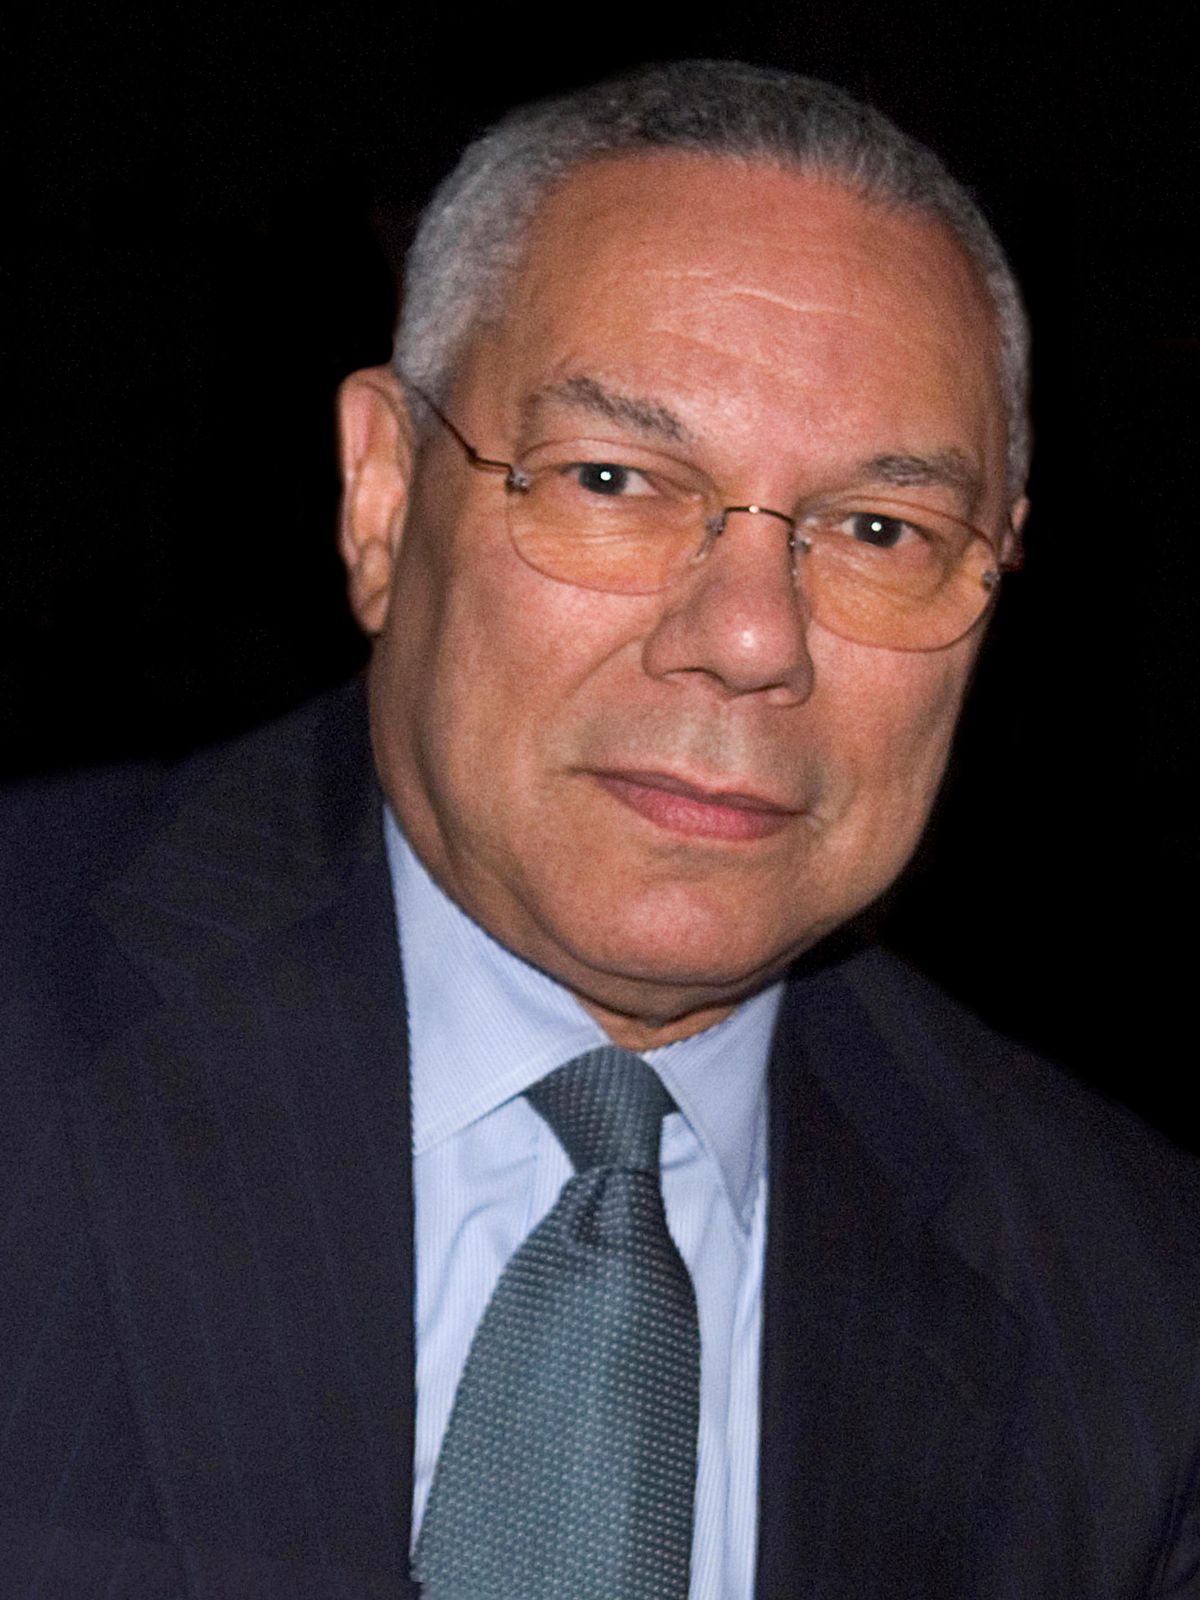 Former U.S. Secretary of State Colin Powell is scheduled to speak Oct. 12 at the Spokane Convention Center during an event hosted by Whitworth University. (Courtesy of Whitworth University)